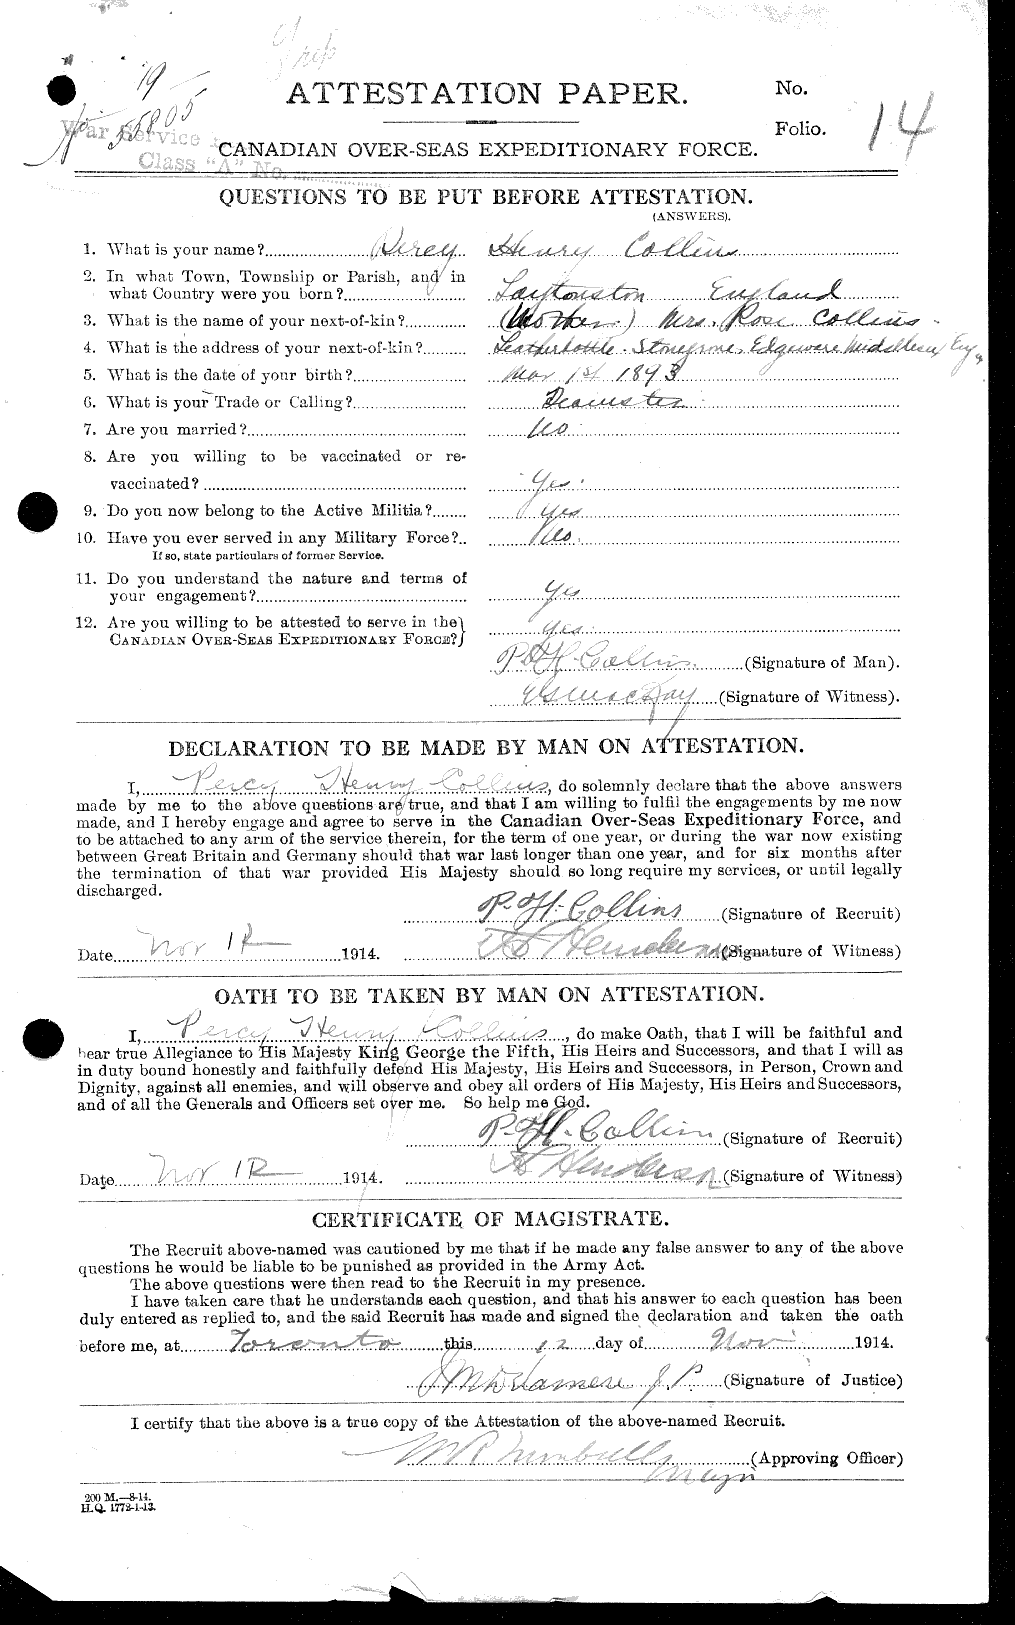 Personnel Records of the First World War - CEF 034494a